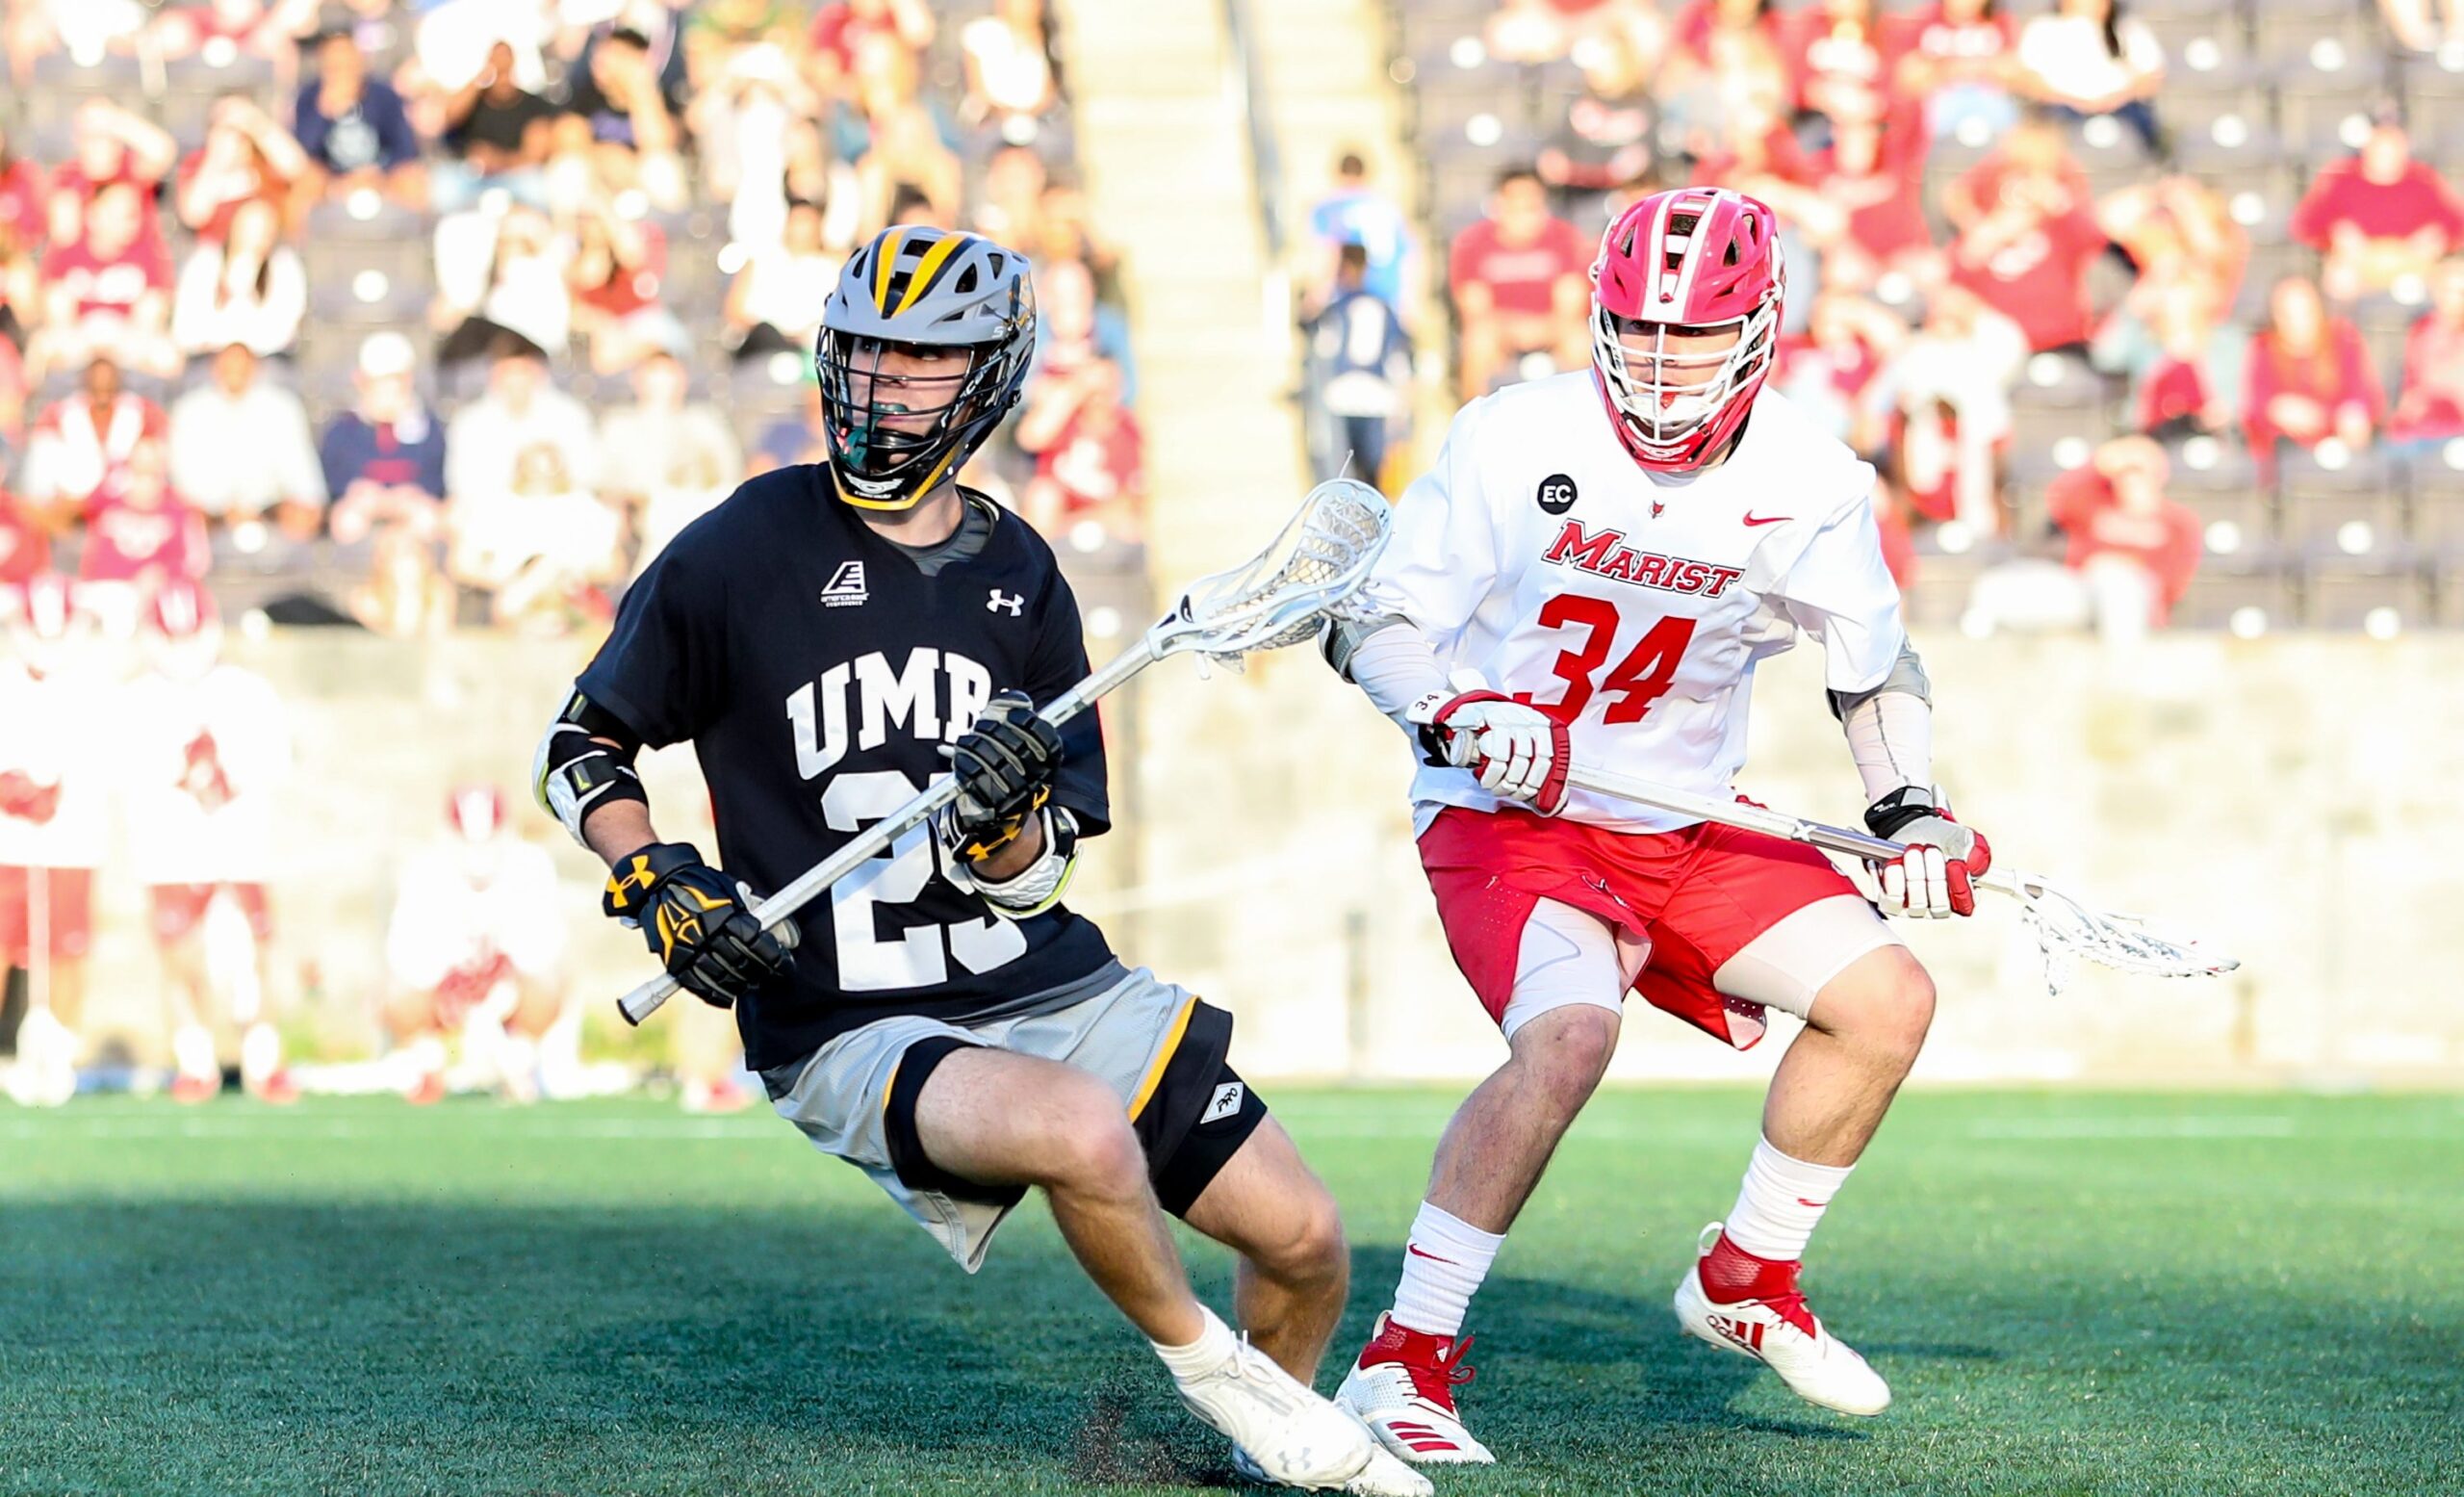 UMBC To Face No. 1 Seed Penn State In NCAA Men's Lacrosse Tournament